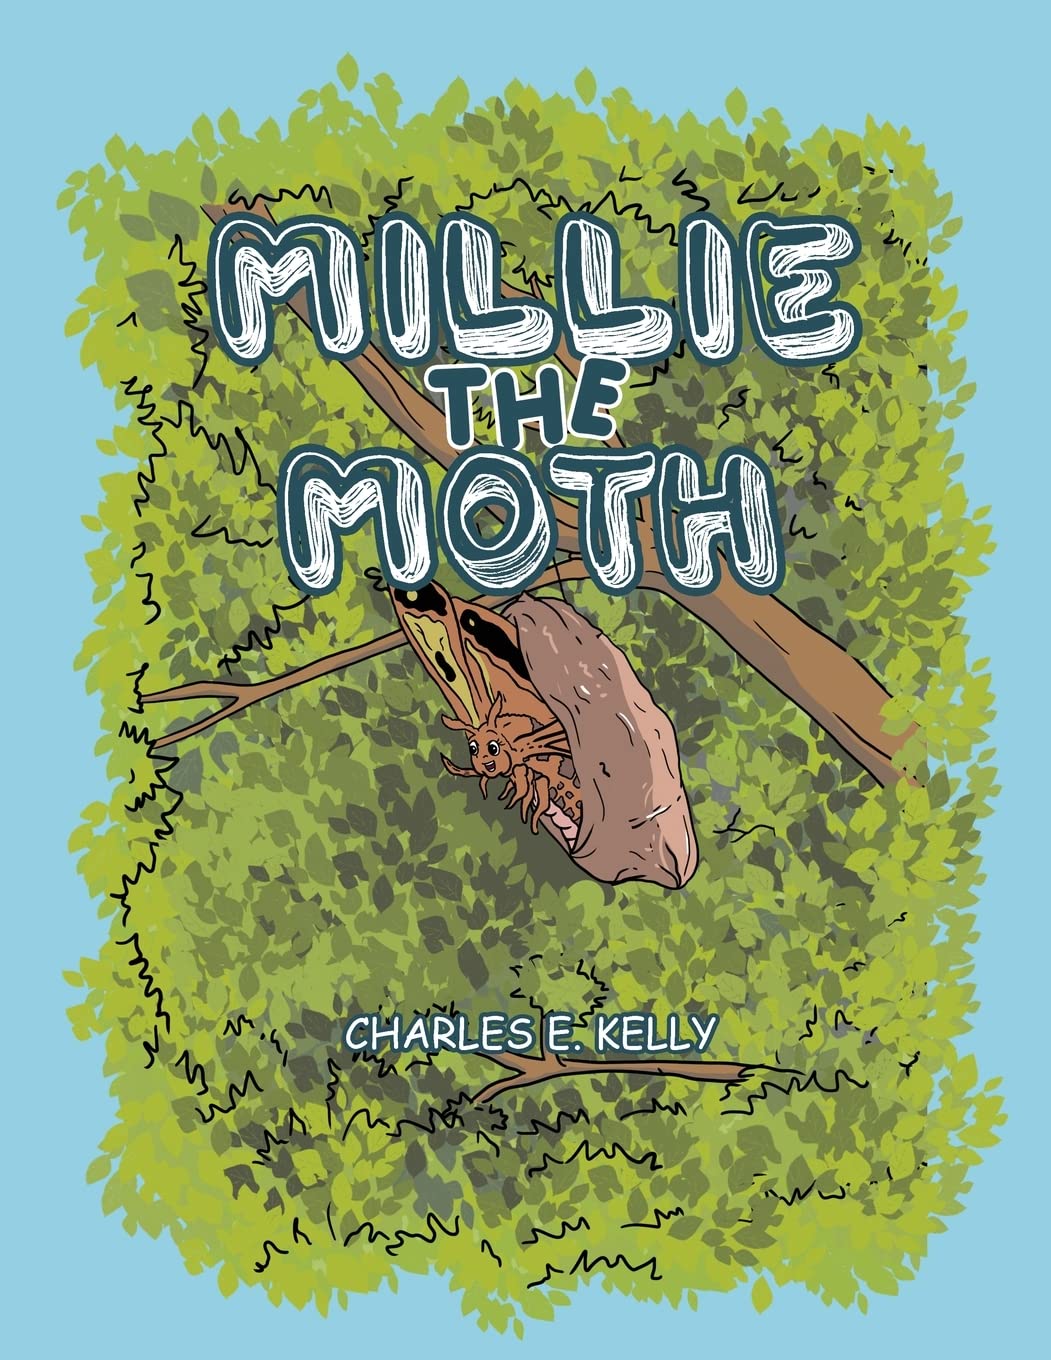 Author’s Tranquility Press Publishes Charles E. Kelly’s First Book Millie the Moth